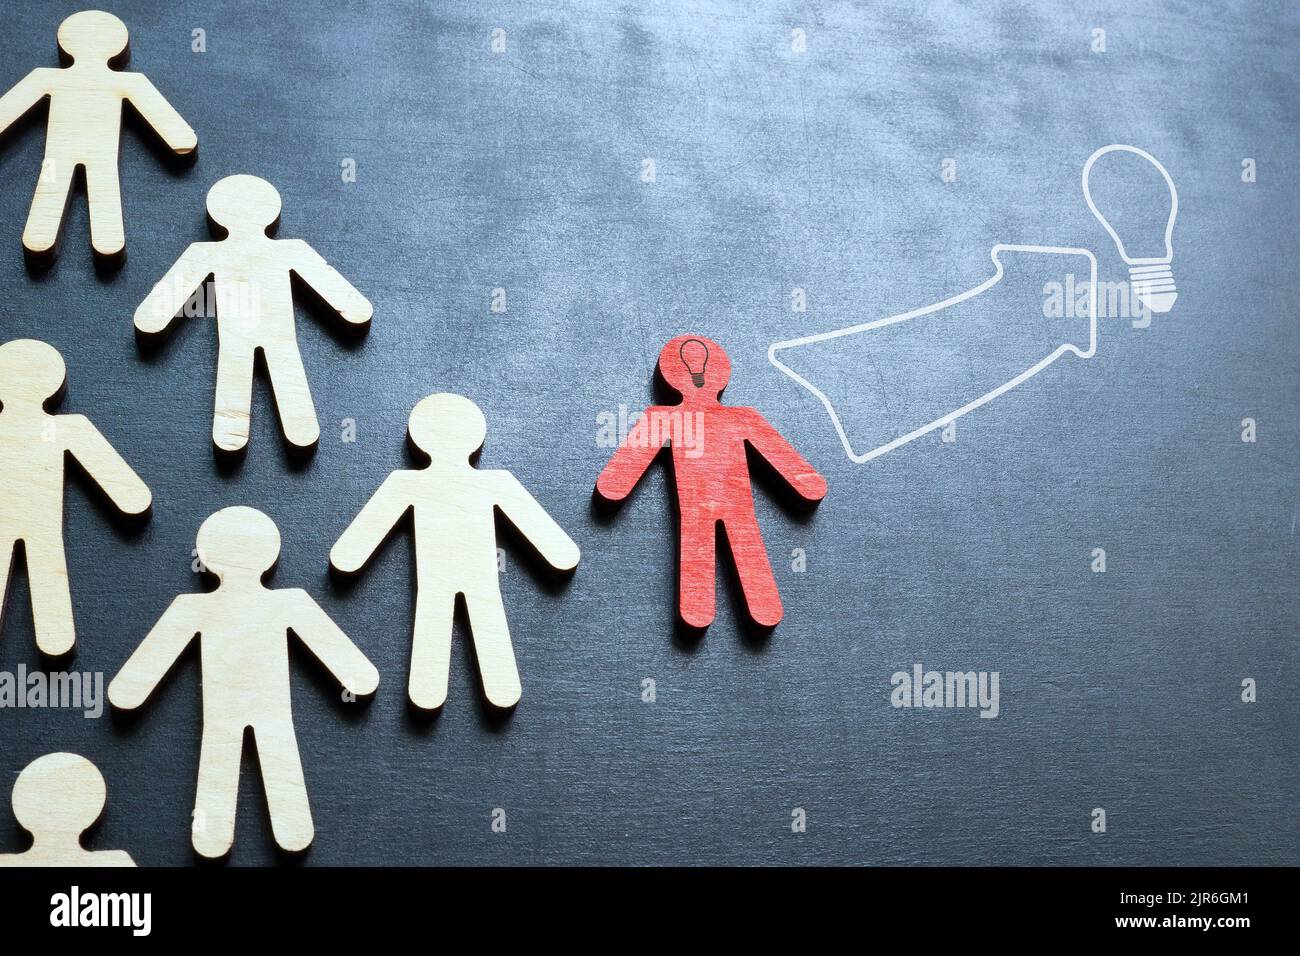 Figures with a leader leading to an idea. Leadership ideas. Stock Photo